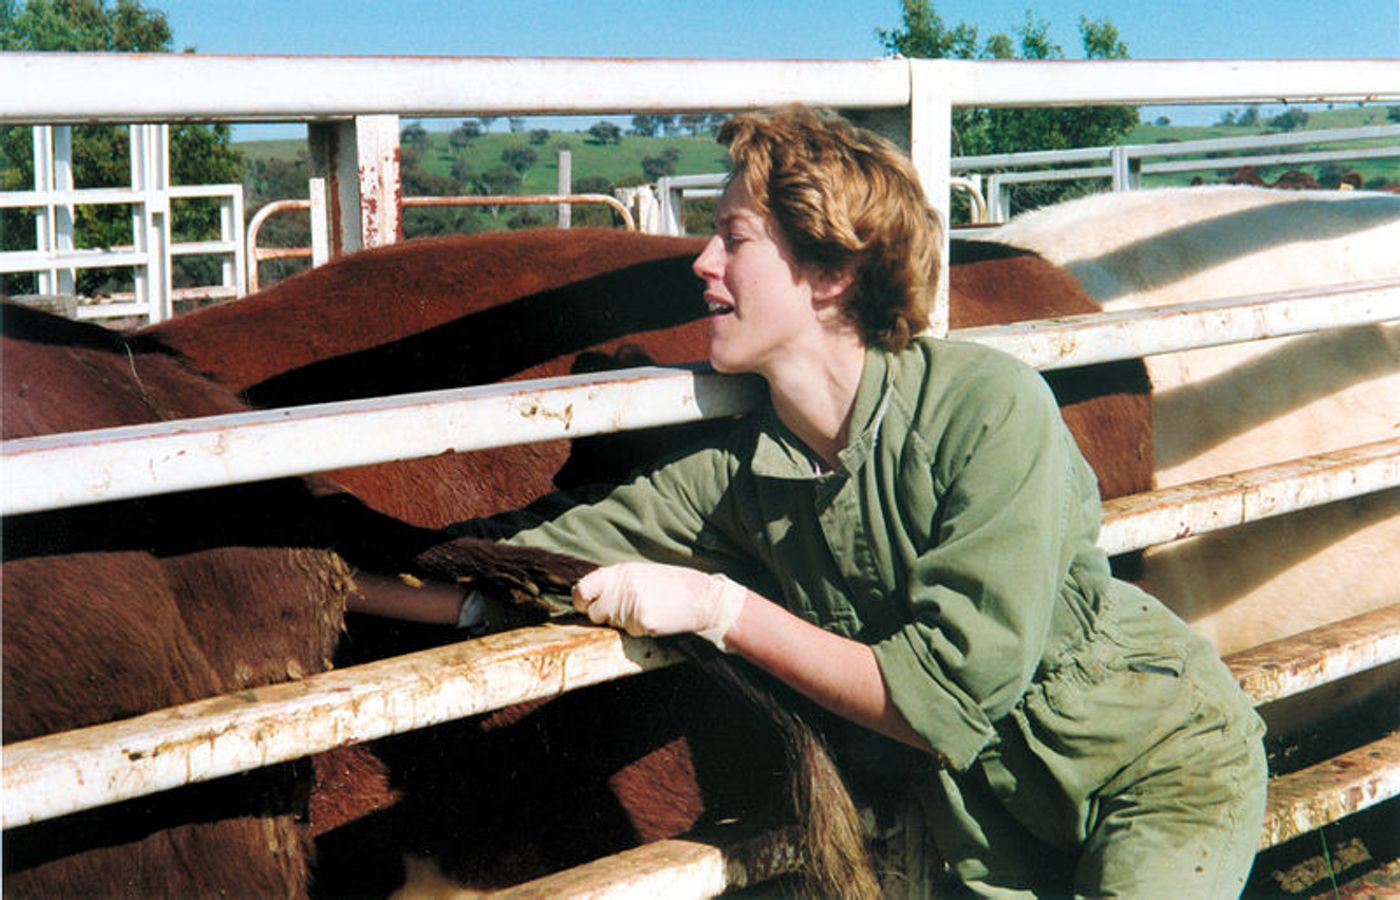 Johne's Disease is a disease of cattle caused by a bacterium which is hard to detect until clinical signs appear. It causes losses due to emaciation and death. Credit: CSIRO